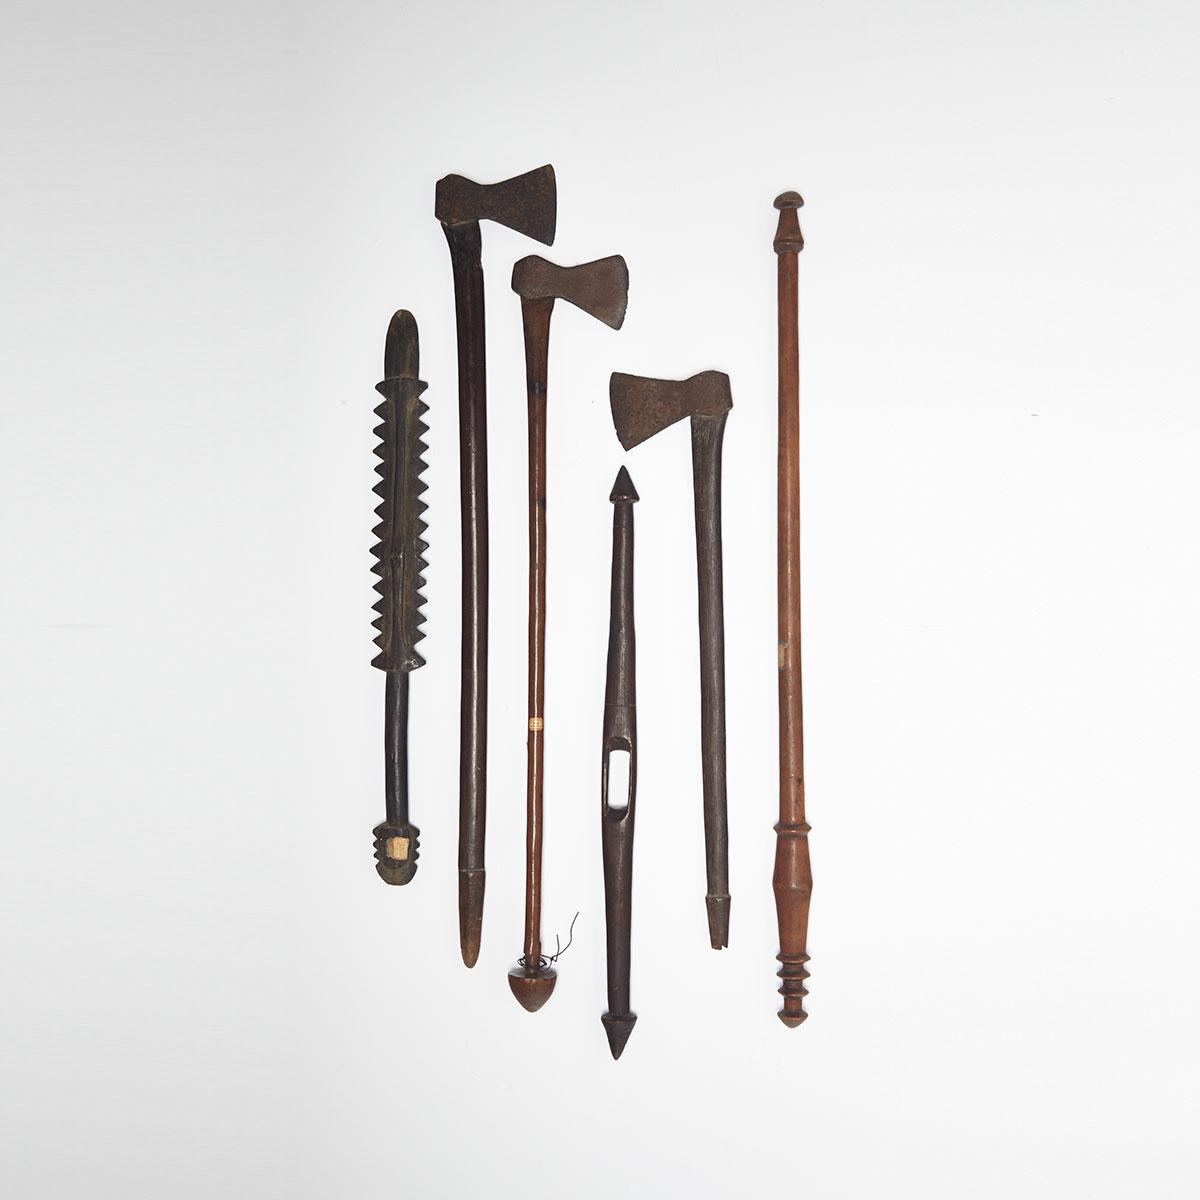 Miscellaneous Group of Six Polynesian Implements, 19th/20th century